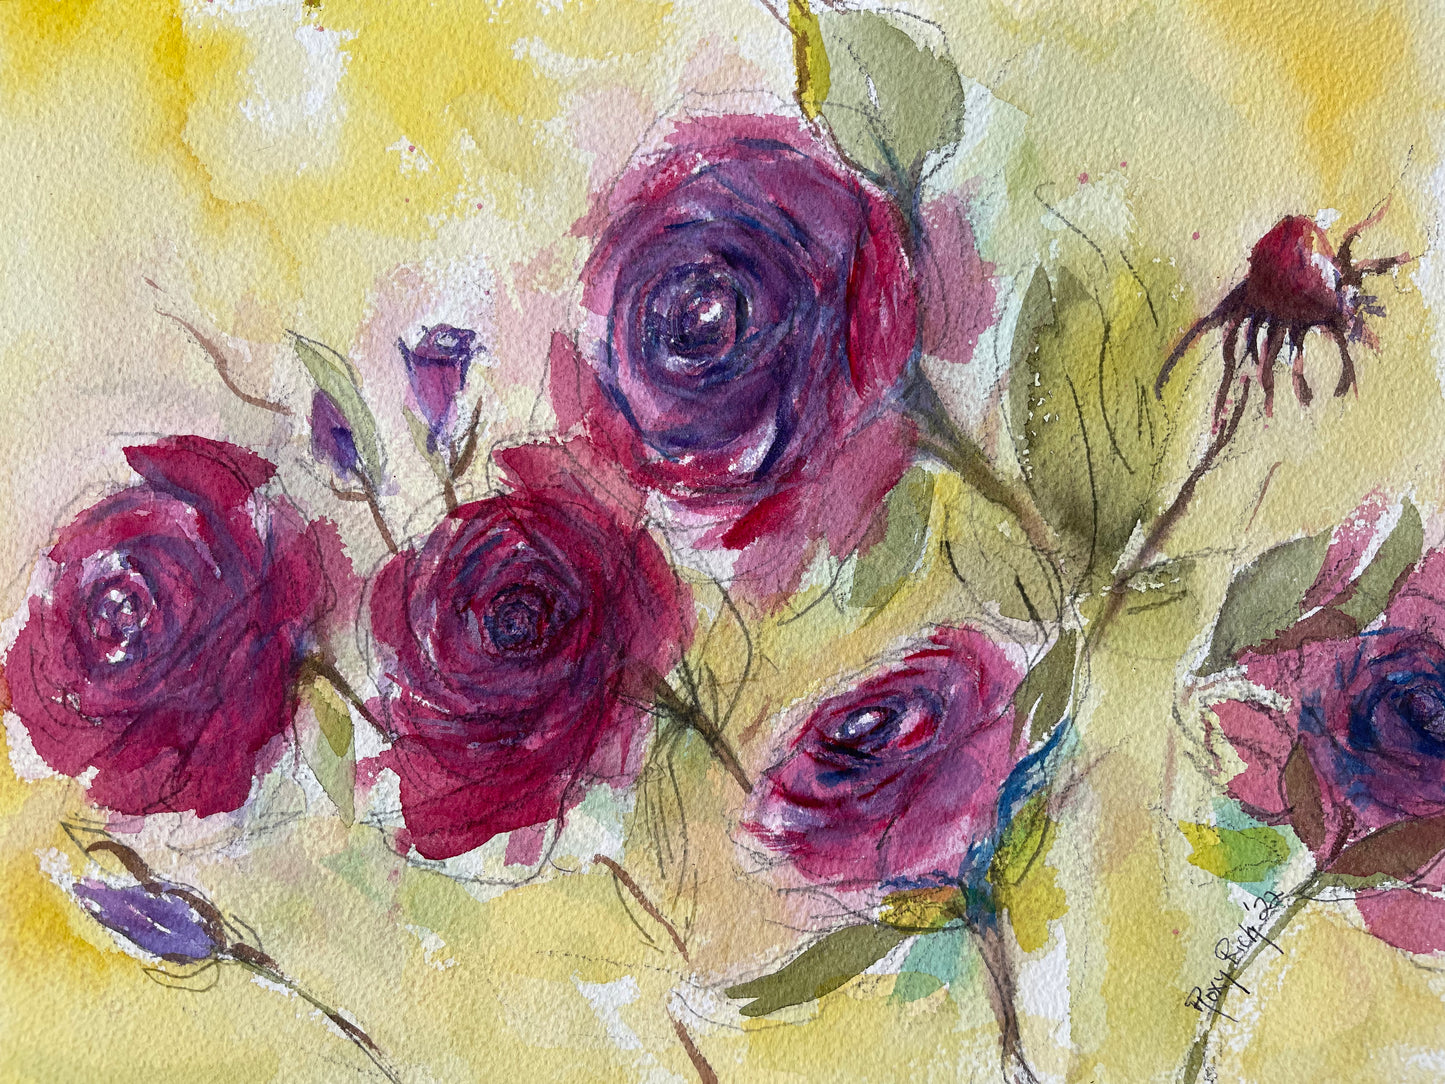 Fluffy Red Roses- Original Watercolor Painting